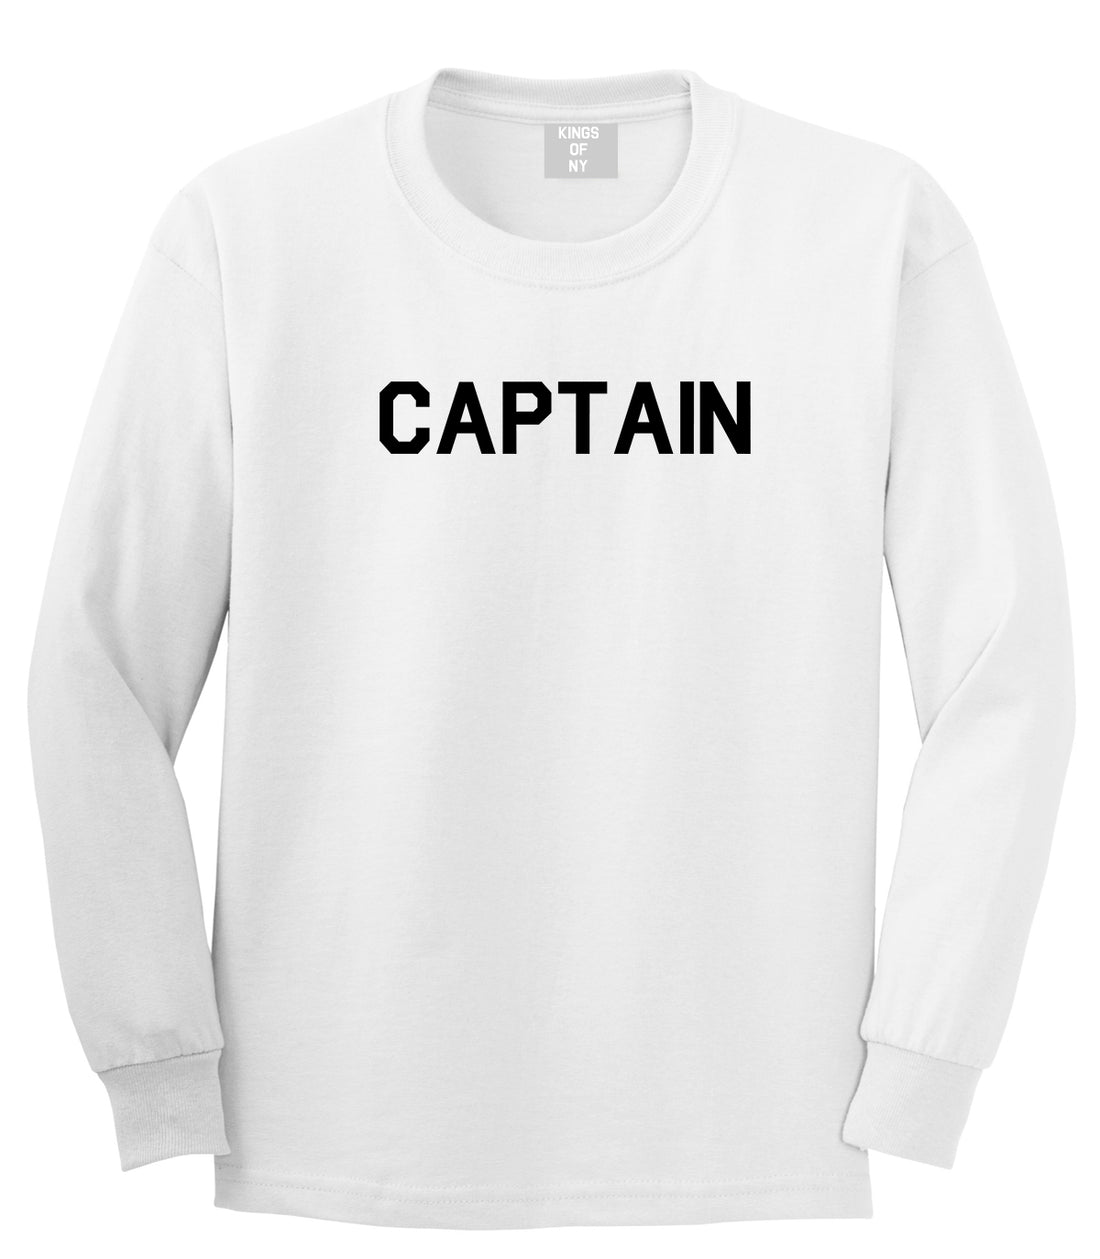 Captain White Long Sleeve T-Shirt by Kings Of NY